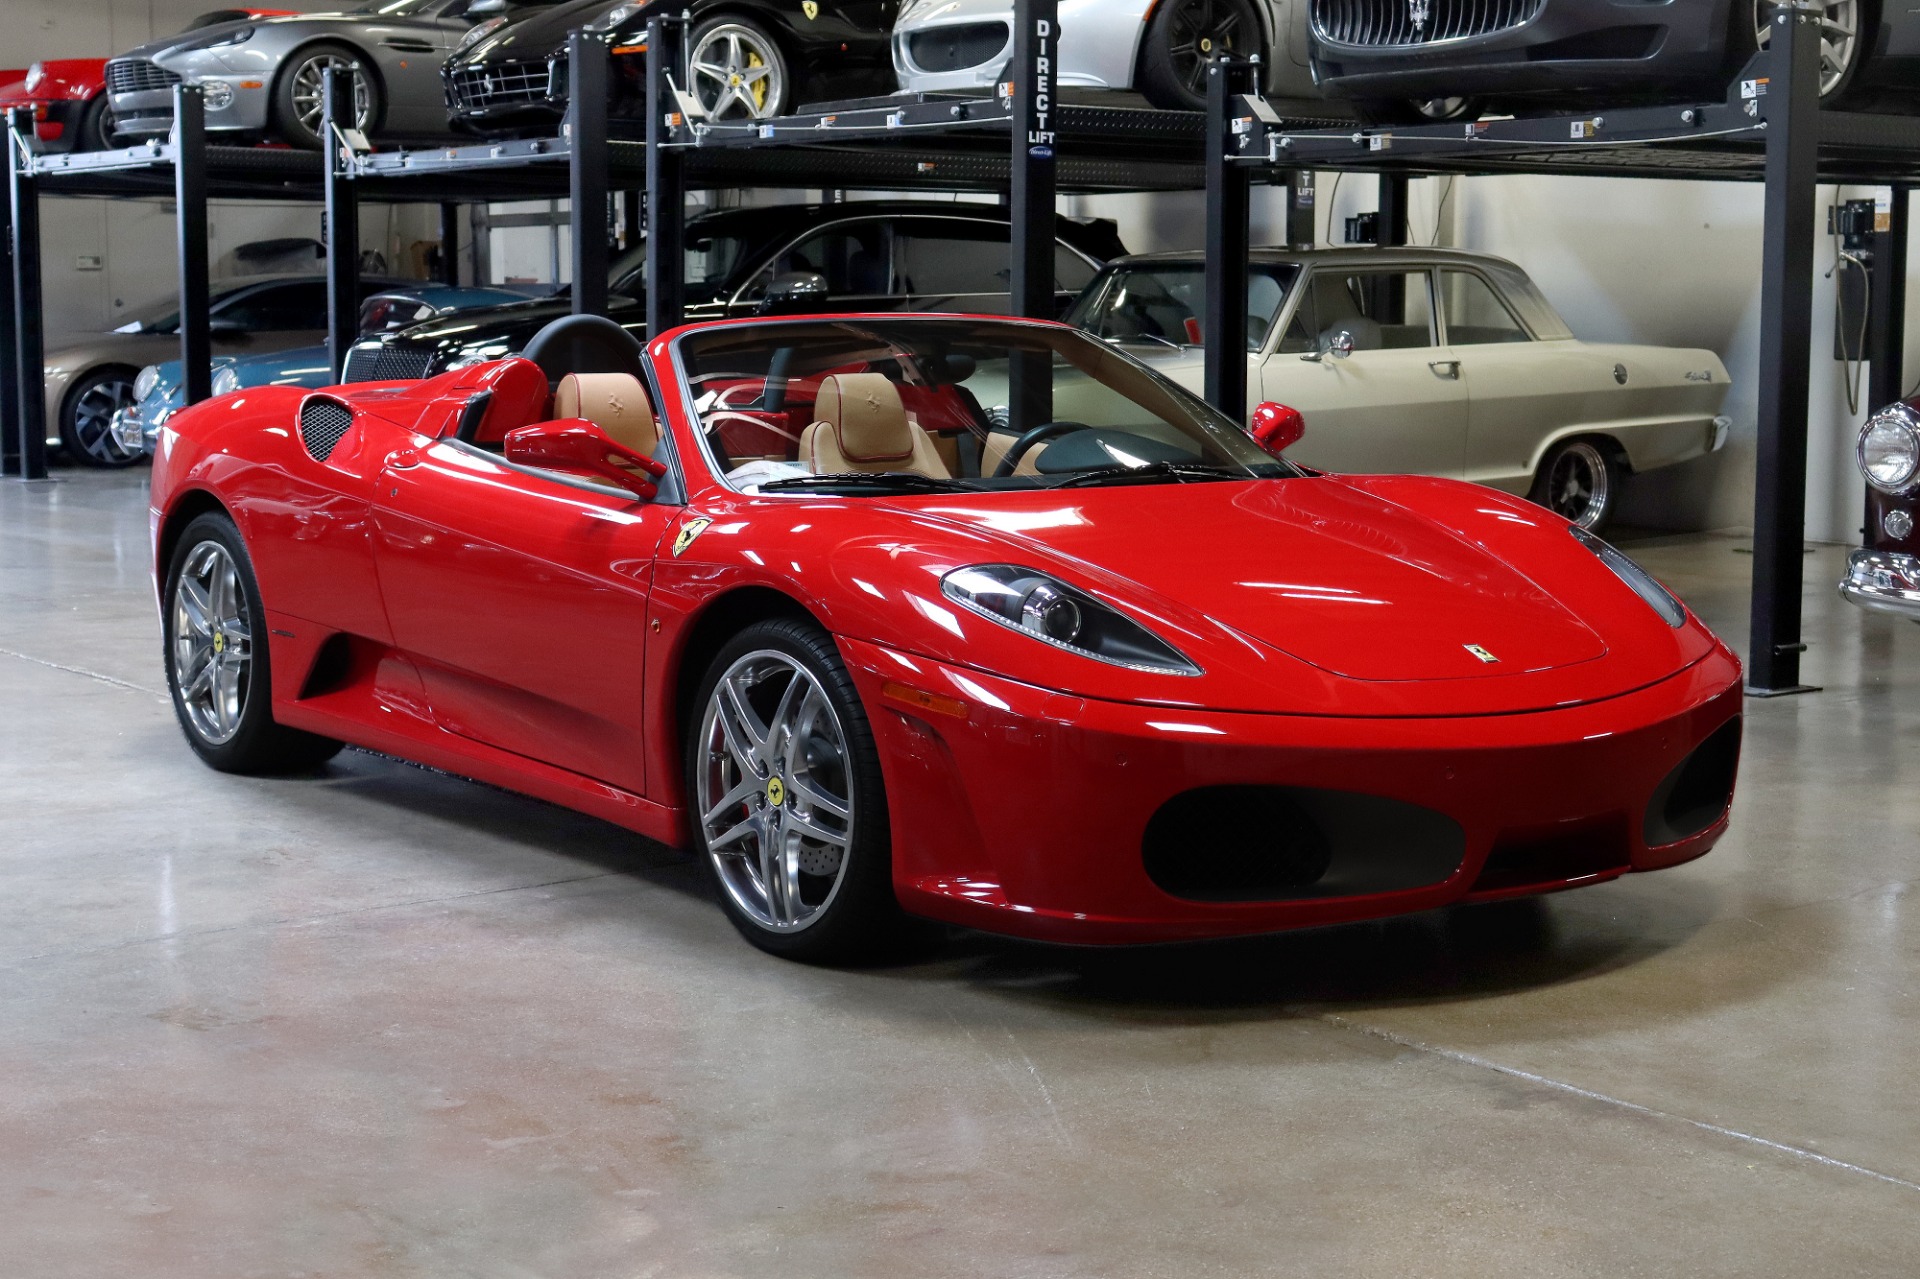 Used 2007 Ferrari F430 Spider 6-Speed for sale $314,995 at San Francisco Sports Cars in San Carlos CA 94070 1